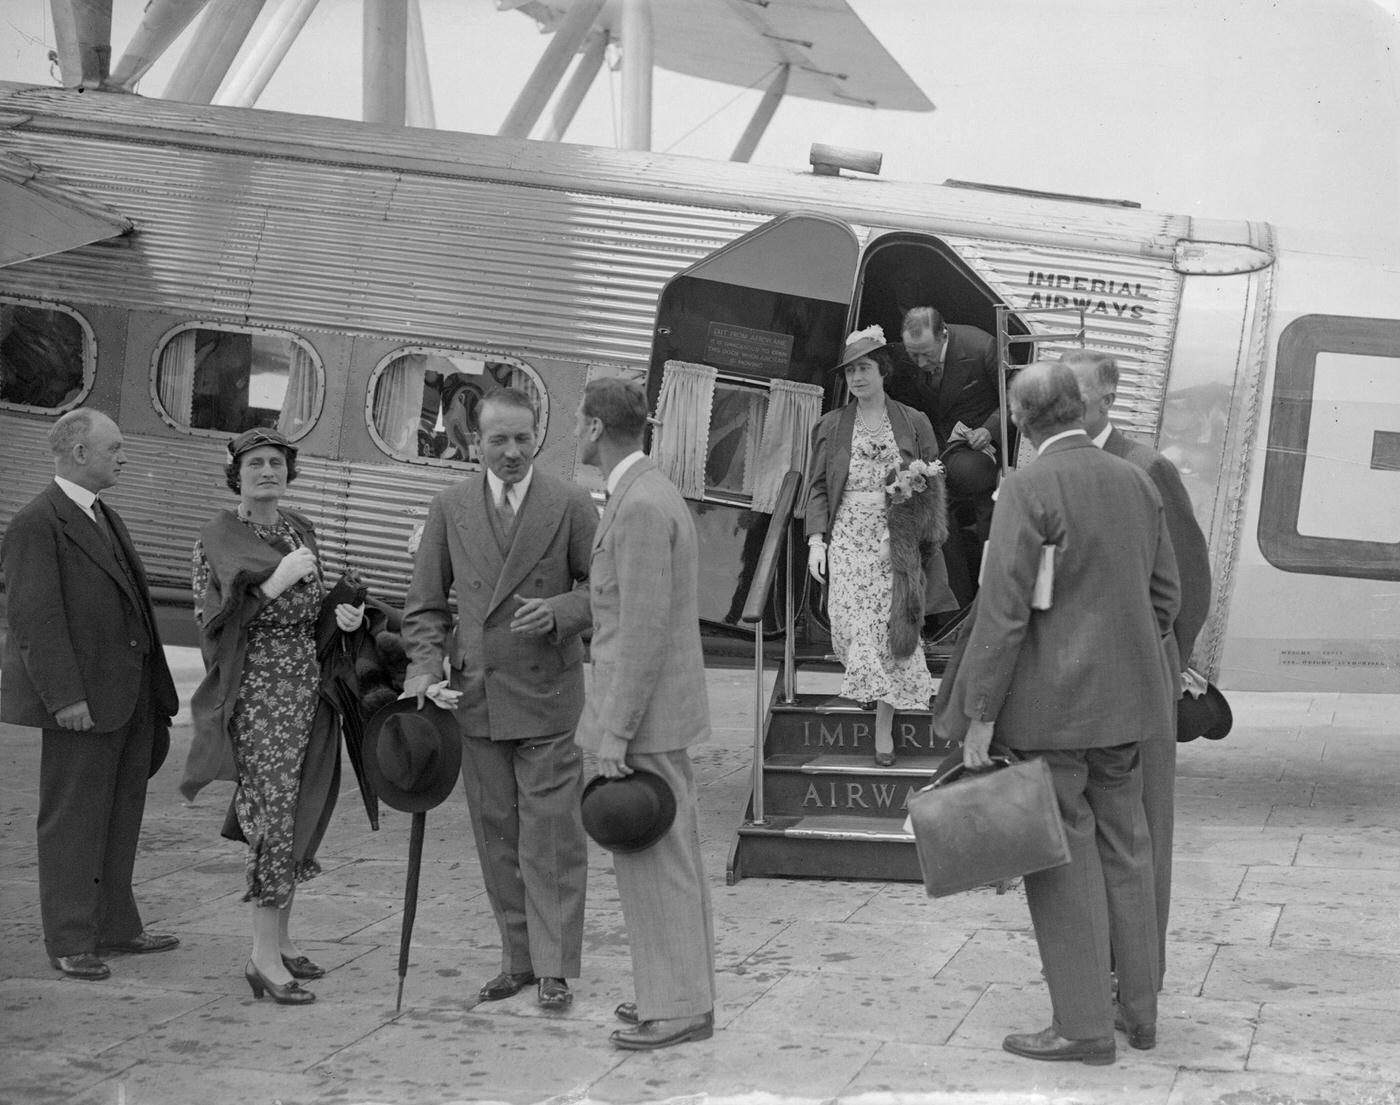 The Duke and Duchess of York alight from an Imperial Airways liner, on their arrival in England from Brussels, 1935